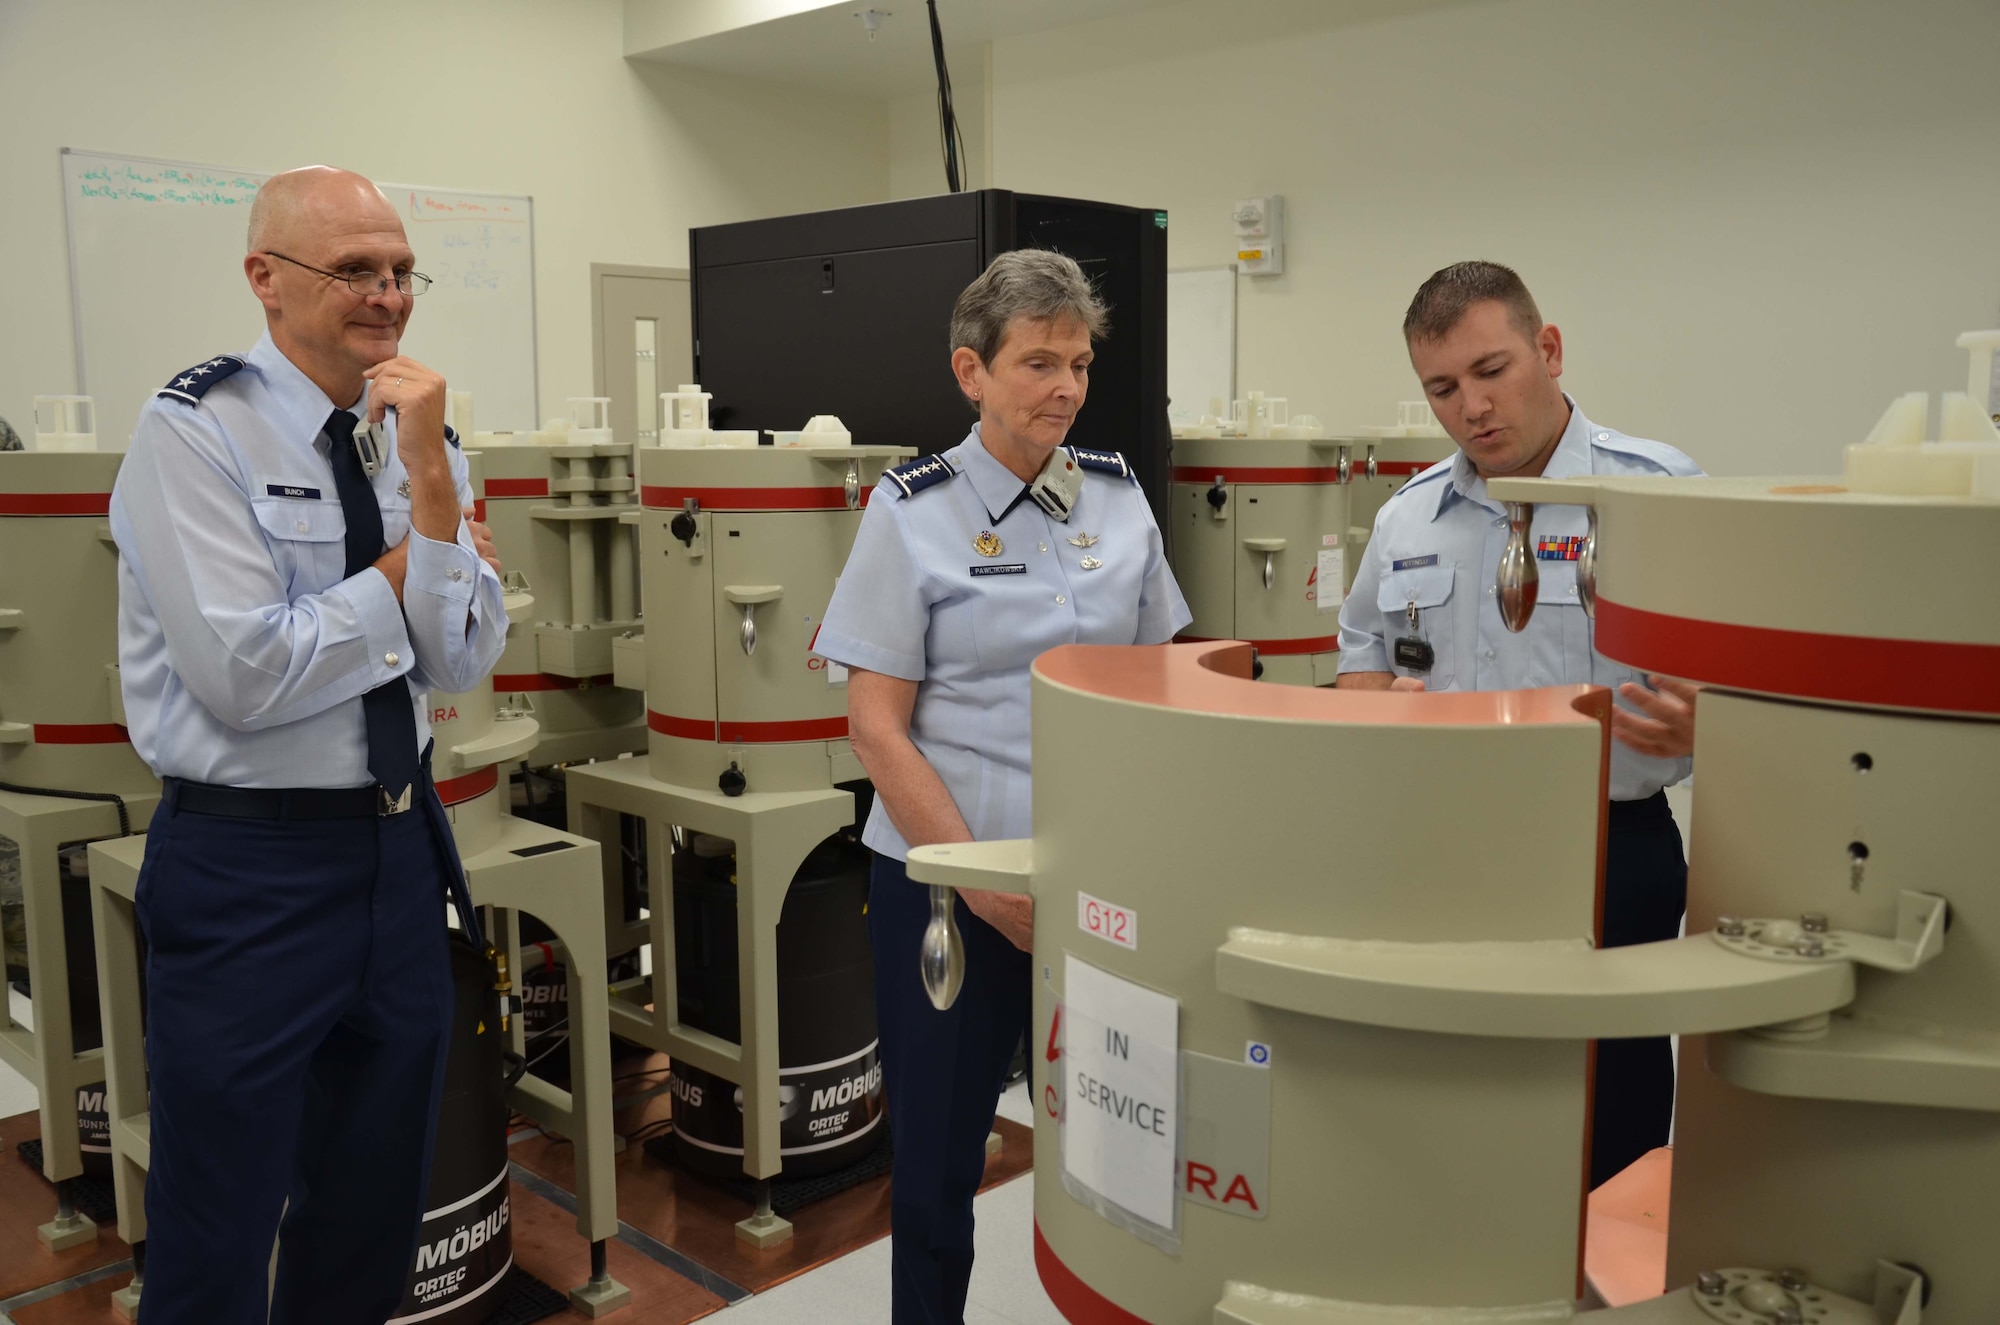 Gen. Ellen M. Pawlikowski, commander of Air Force
Materiel Command, and Lt. Gen. Arnold Bunch, military deputy in the Assistant Secretary for the Office of the Assistant Secretary of the Air Force for Acquisition, listen to Staff Sgt. David A. Pettinelli Jr., a radiochemistry lab technician at the Air Force Technical Applications Center, brief them about the capabilities of equipment in AFTAC's Ciambrone Radiochemistry Lab.  The generals were in town to participate in the 2016 Women in Science and Engineering Symposium at Patrick AFB, Fla., Sept. 7, 2016.  (U.S. Air Force photo by Scott Powell)
